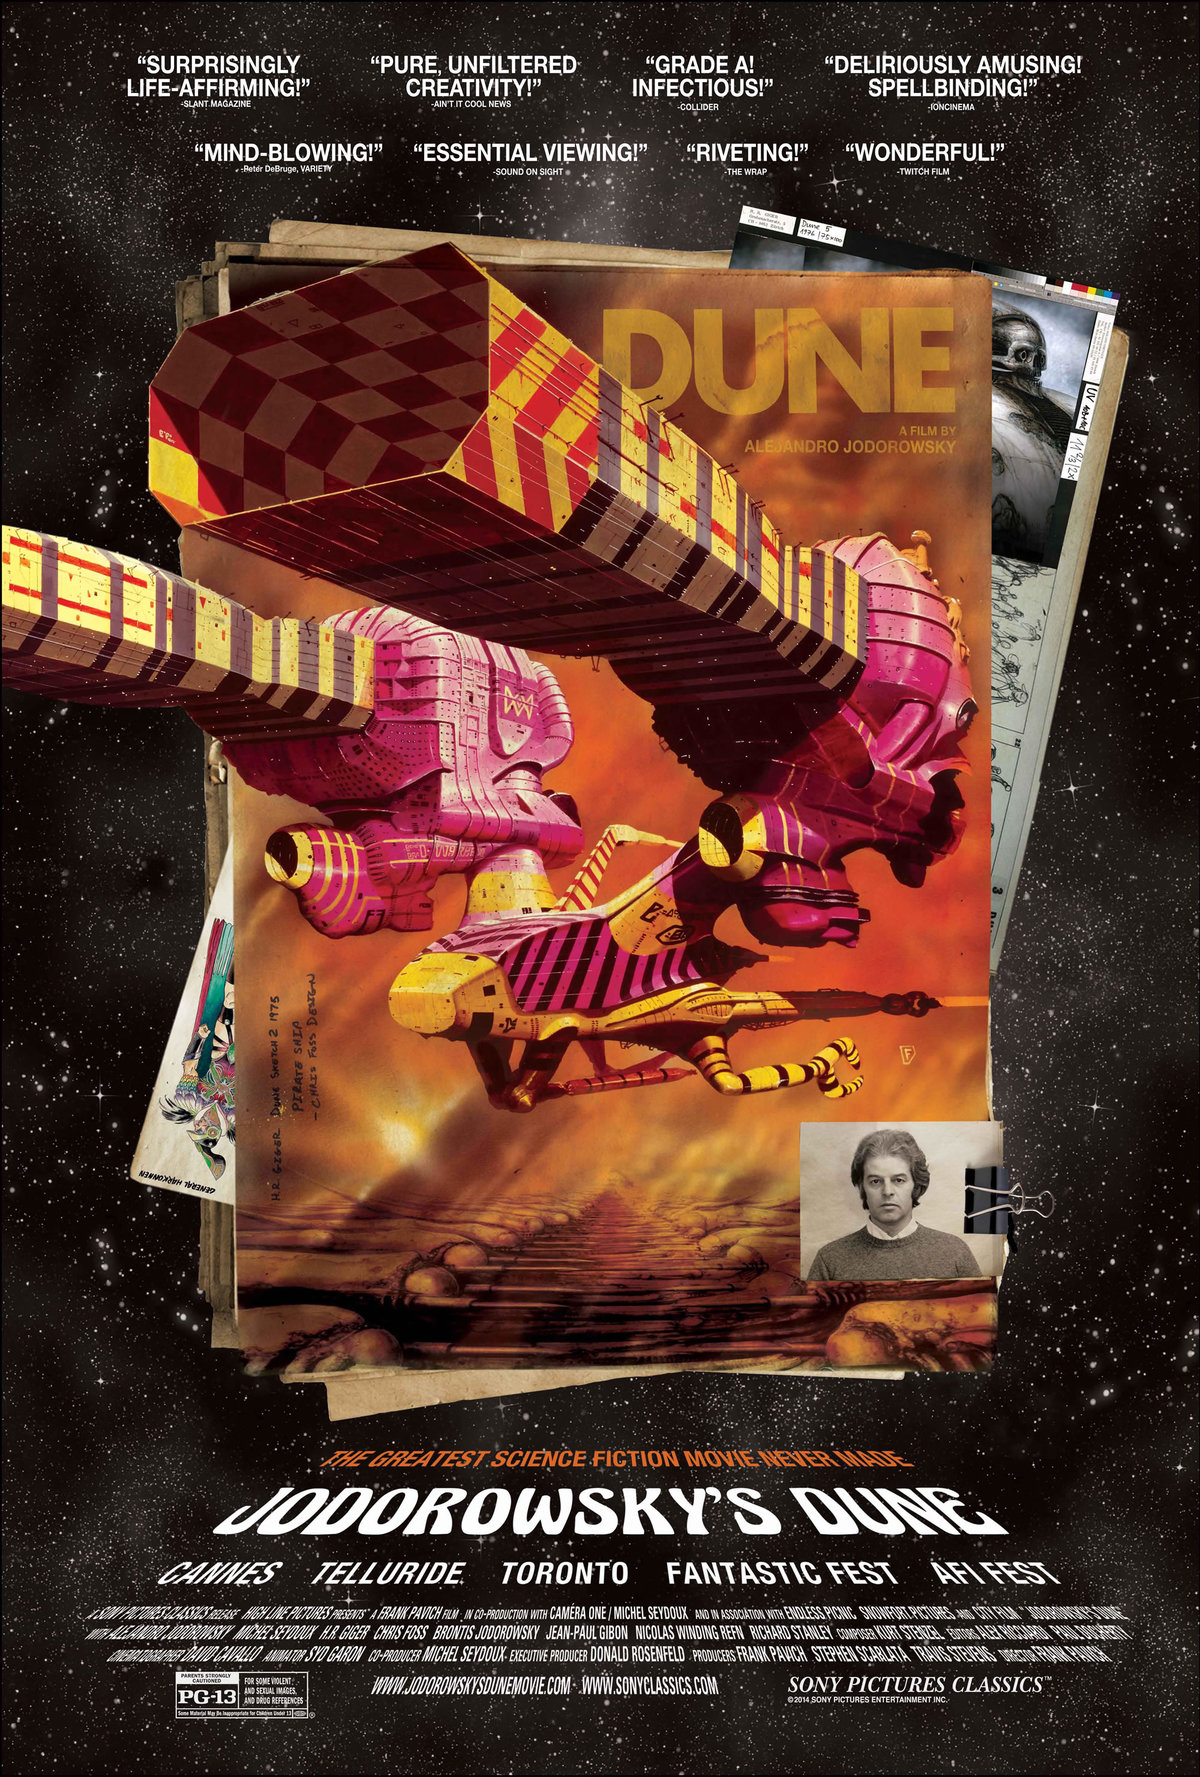 black-gate-articles-too-grand-a-vision-a-review-of-jodorowsky-s-dune